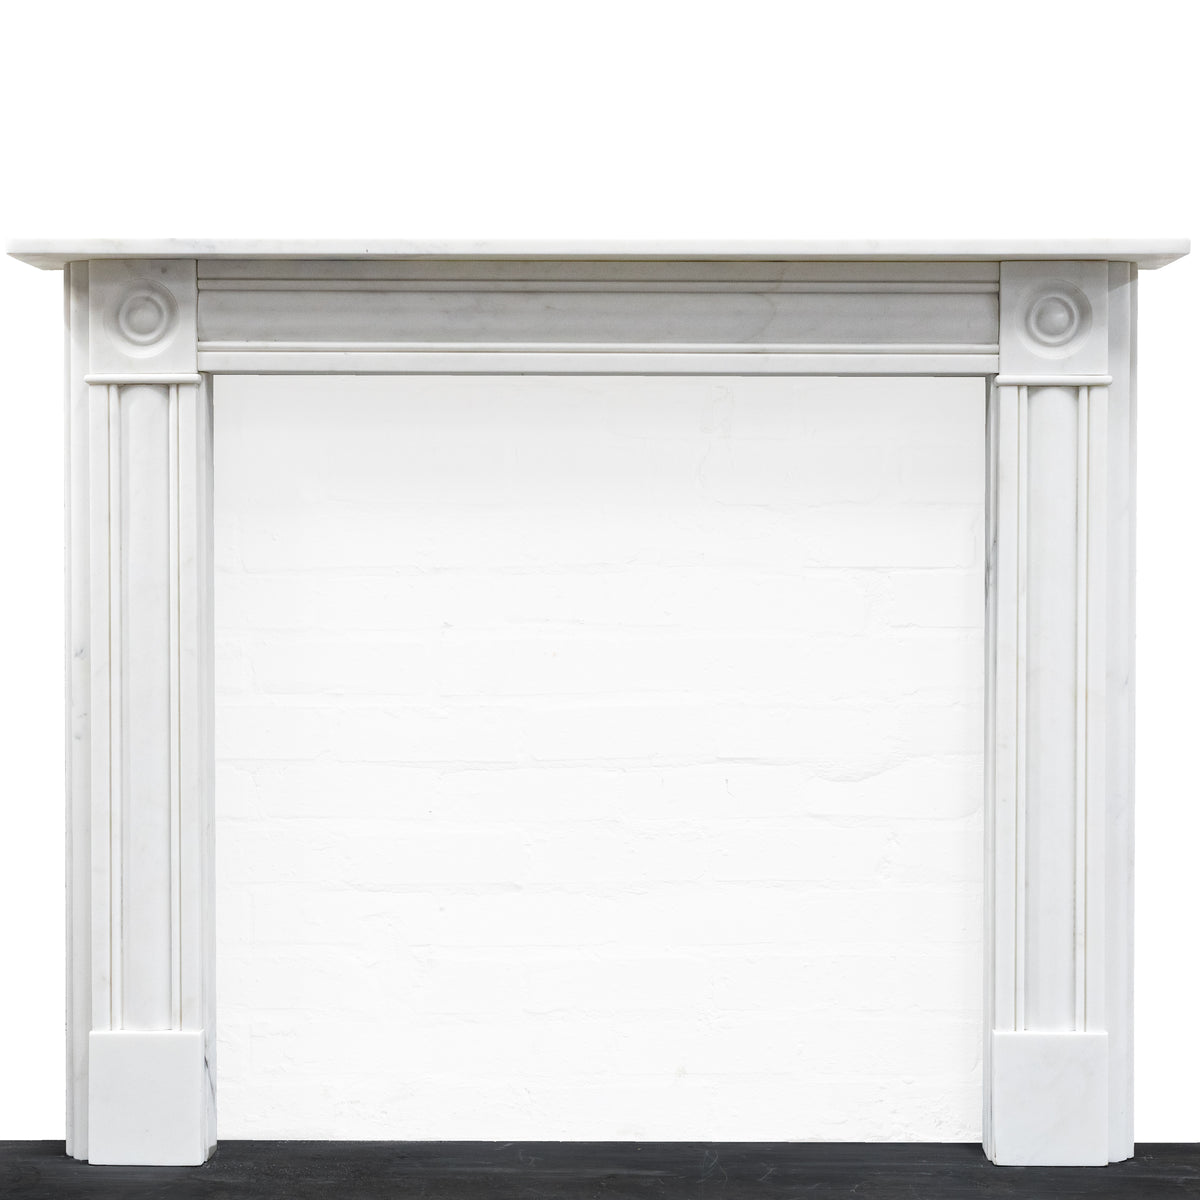 Georgian Style Bullseye Fireplace Surrounds | Various Options | The Architectural Forum